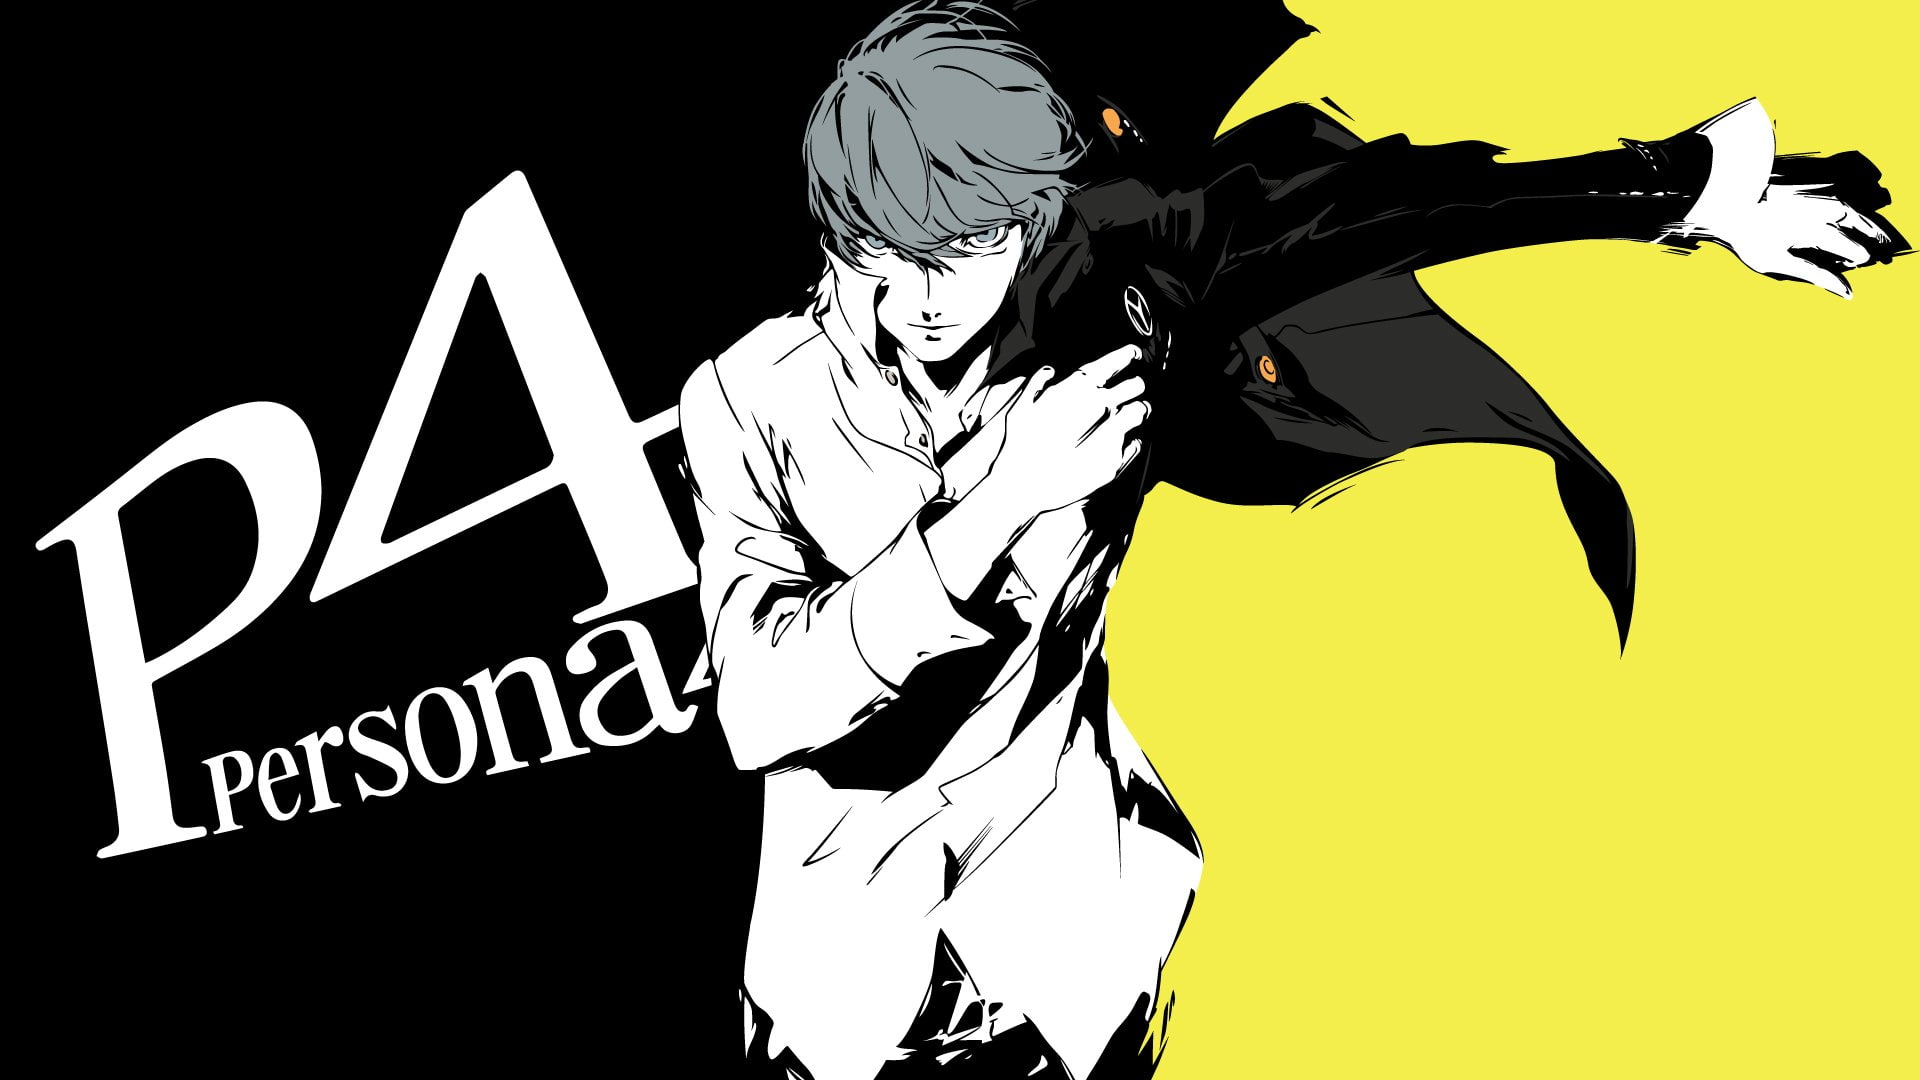 Persona 4 Persona Series Protagonist Jacket Video Game Characters Video Games Anime Boys 1920x1080